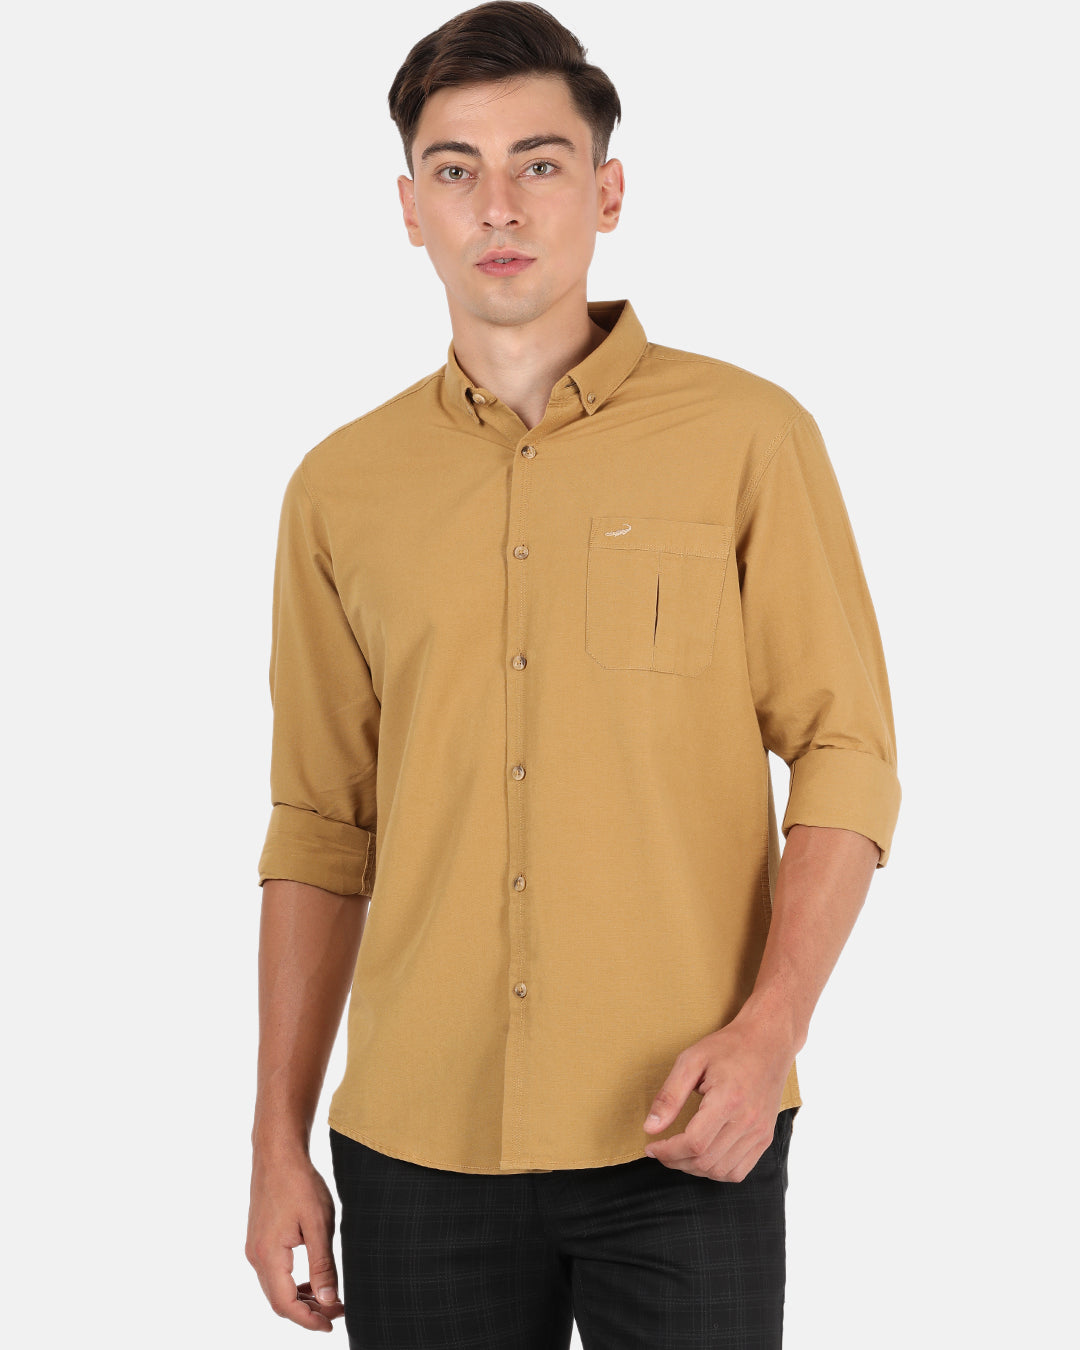 Crocodile Casual Full Sleeve Comfort Fit Solid Light Brown with Collar Shirt for Men